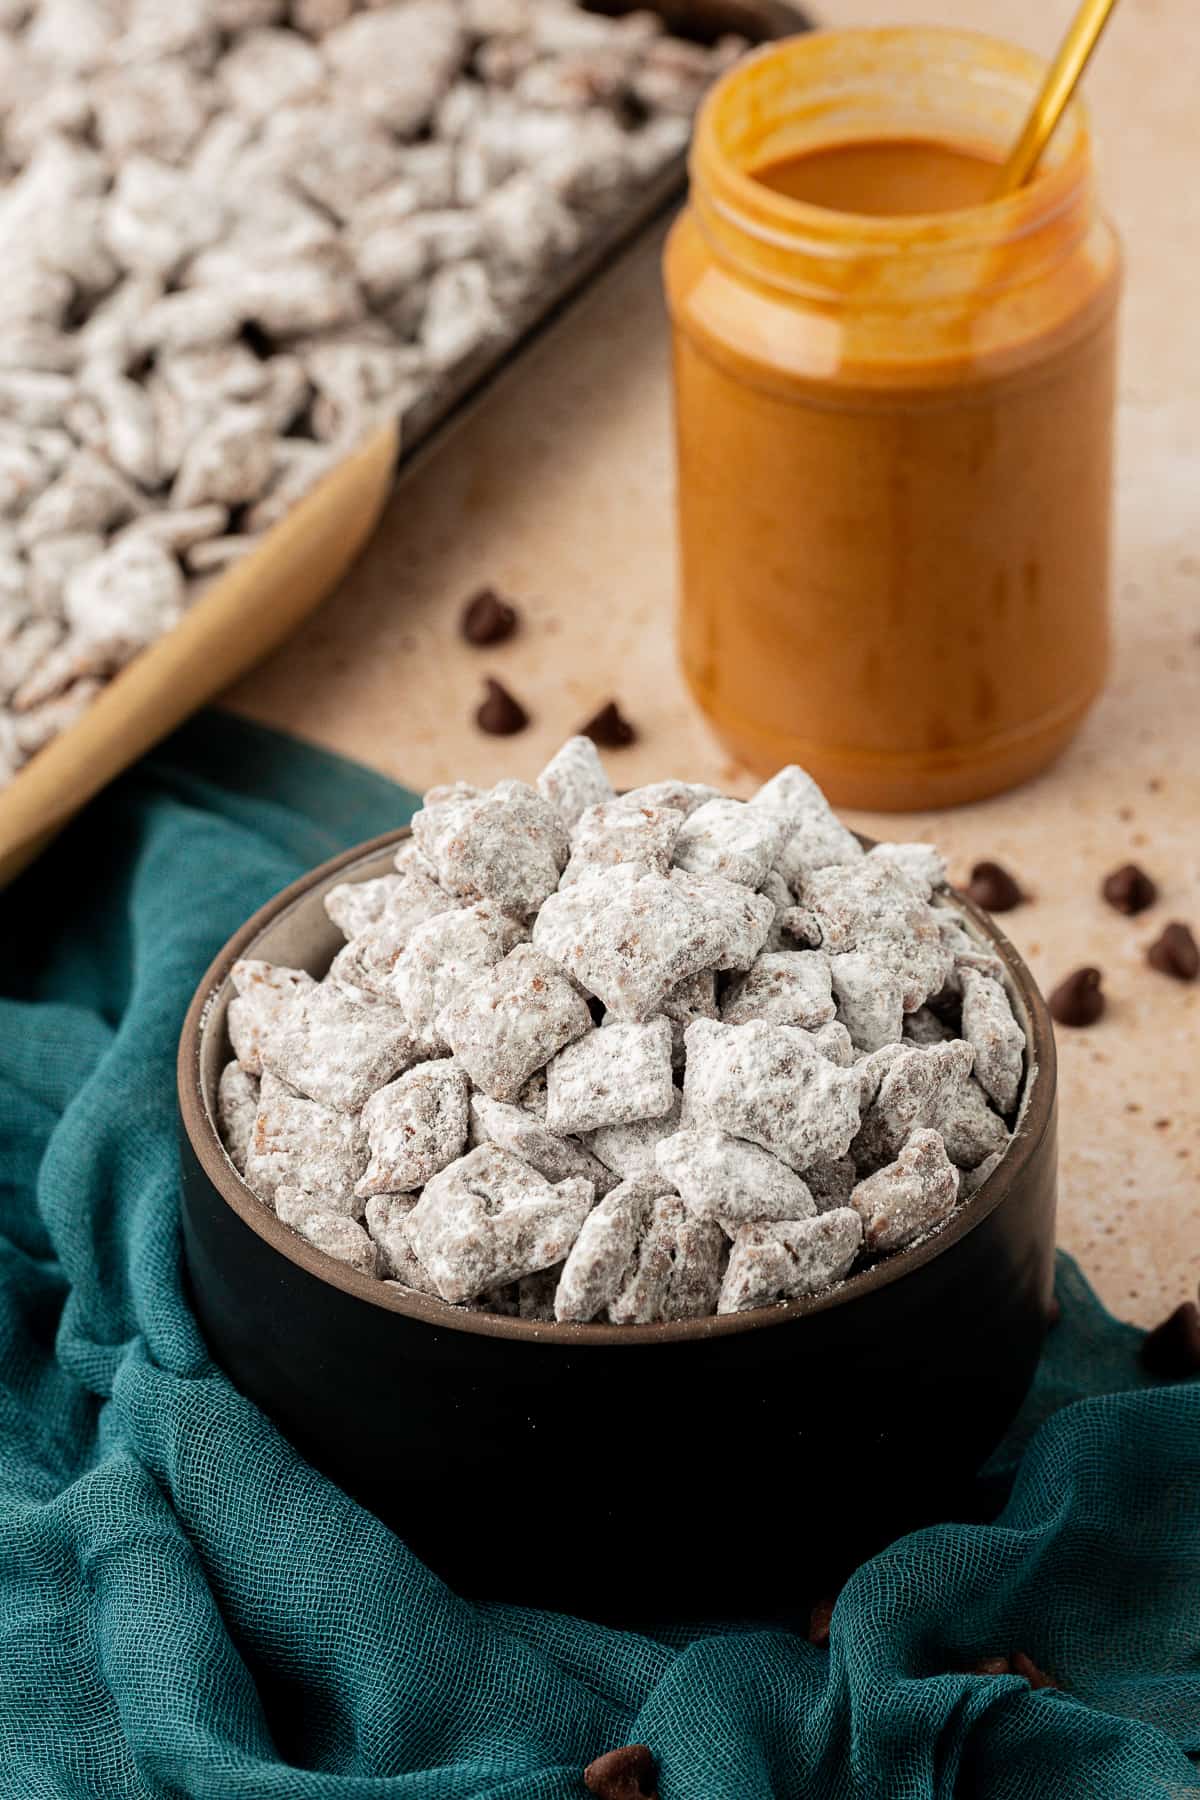 a black bowl full of puppy chow on a dark teal towel with a jar of peanut butter beside it and a sheet pan full of more puppy chow, with chocolate chips sprinkled around